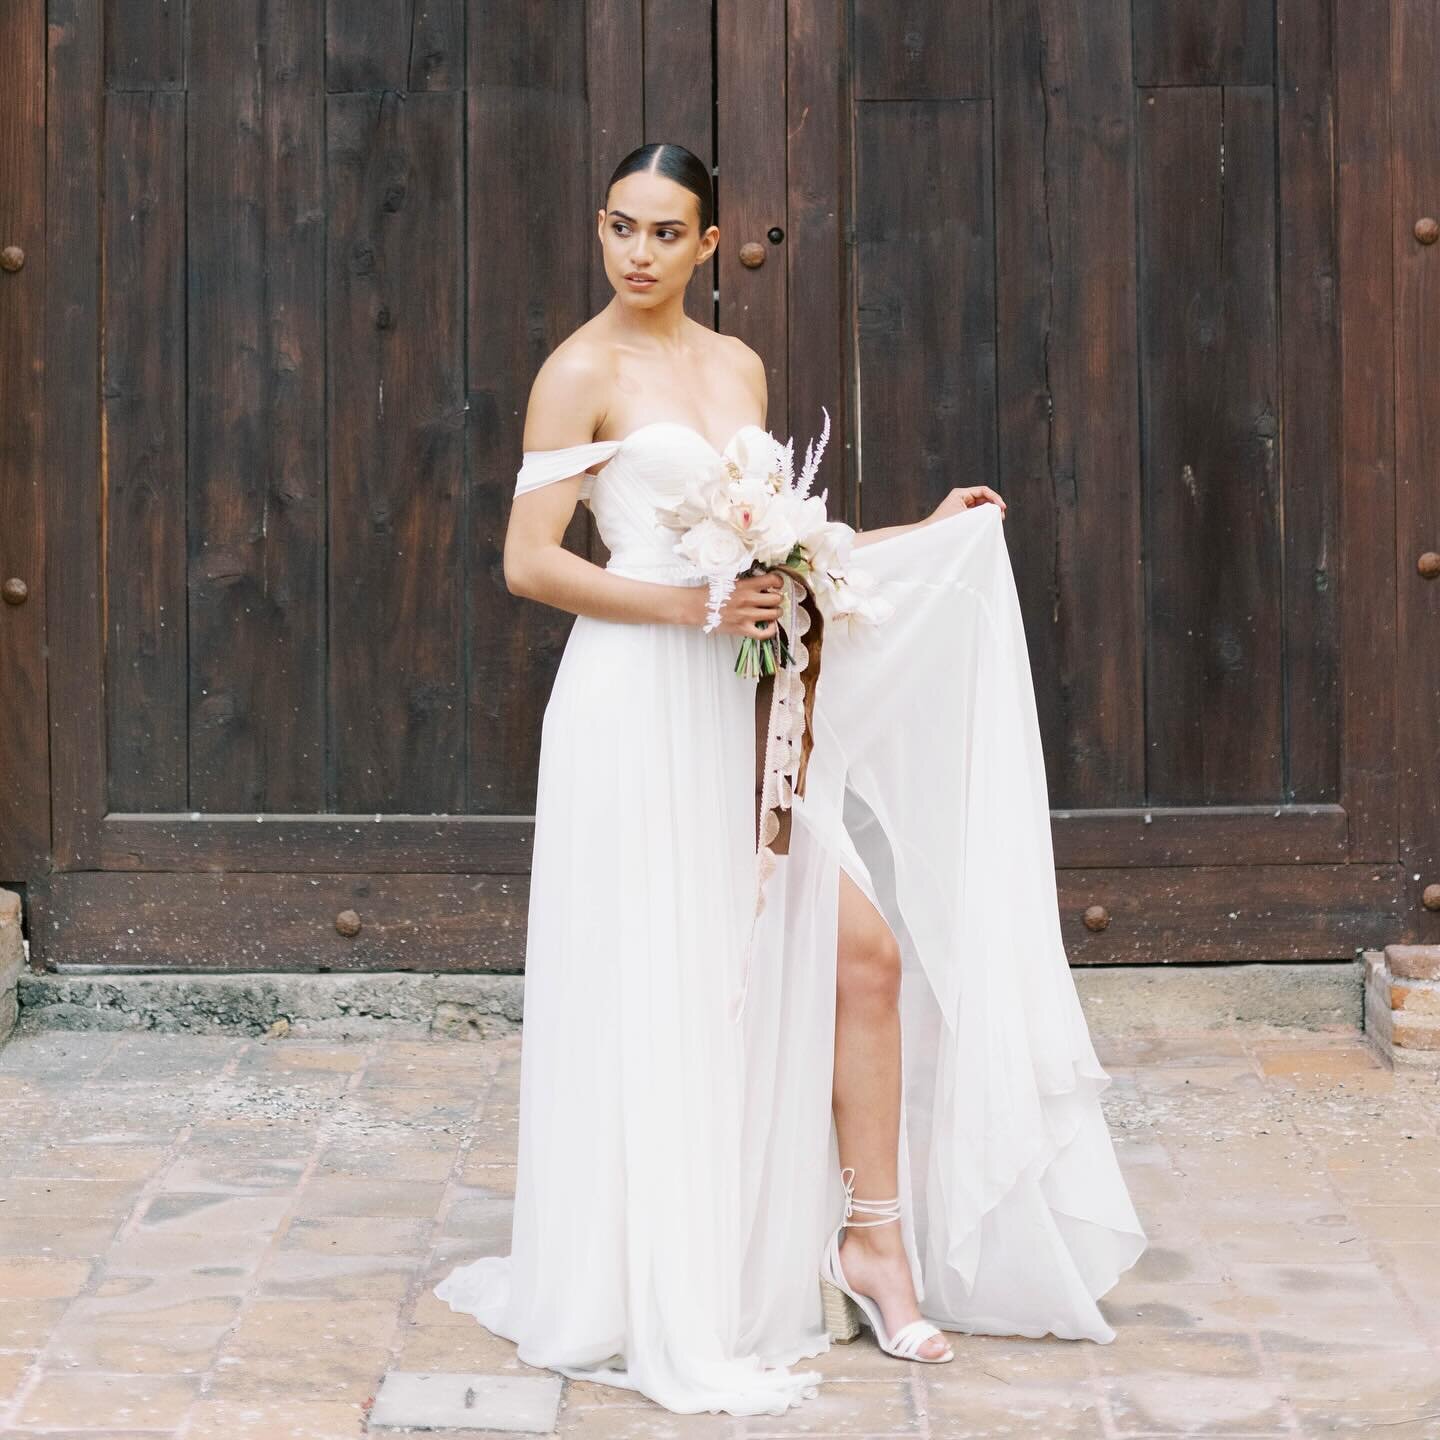 Sexy and sweet Natalie Gown is timeless&hellip; paired with a open ankle strap shoe and a little leg action. ✨✨✨ Perfect for outdoor weddings. Contact me for custom orders:)
⠀⠀⠀⠀⠀⠀⠀⠀⠀⠀⠀⠀
⠀⠀⠀⠀⠀⠀⠀⠀⠀⠀⠀⠀
#tatyanamerenyuk #bridal #handmade #custommade #pl